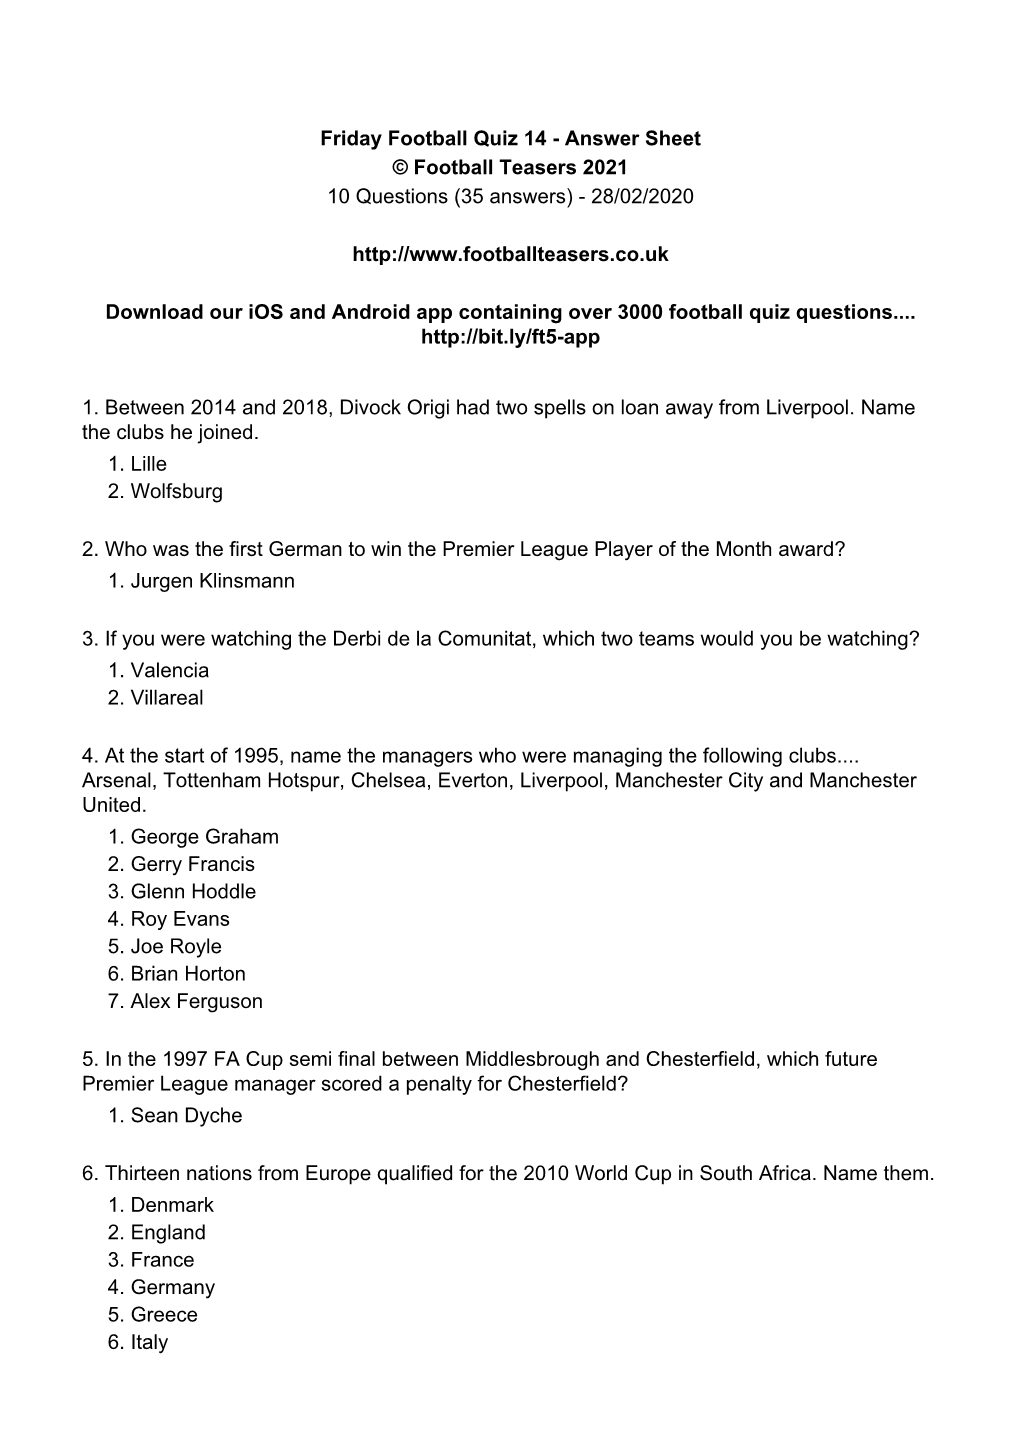 Friday Football Quiz 14 - Answer Sheet © Football Teasers 2021 10 Questions (35 Answers) - 28/02/2020